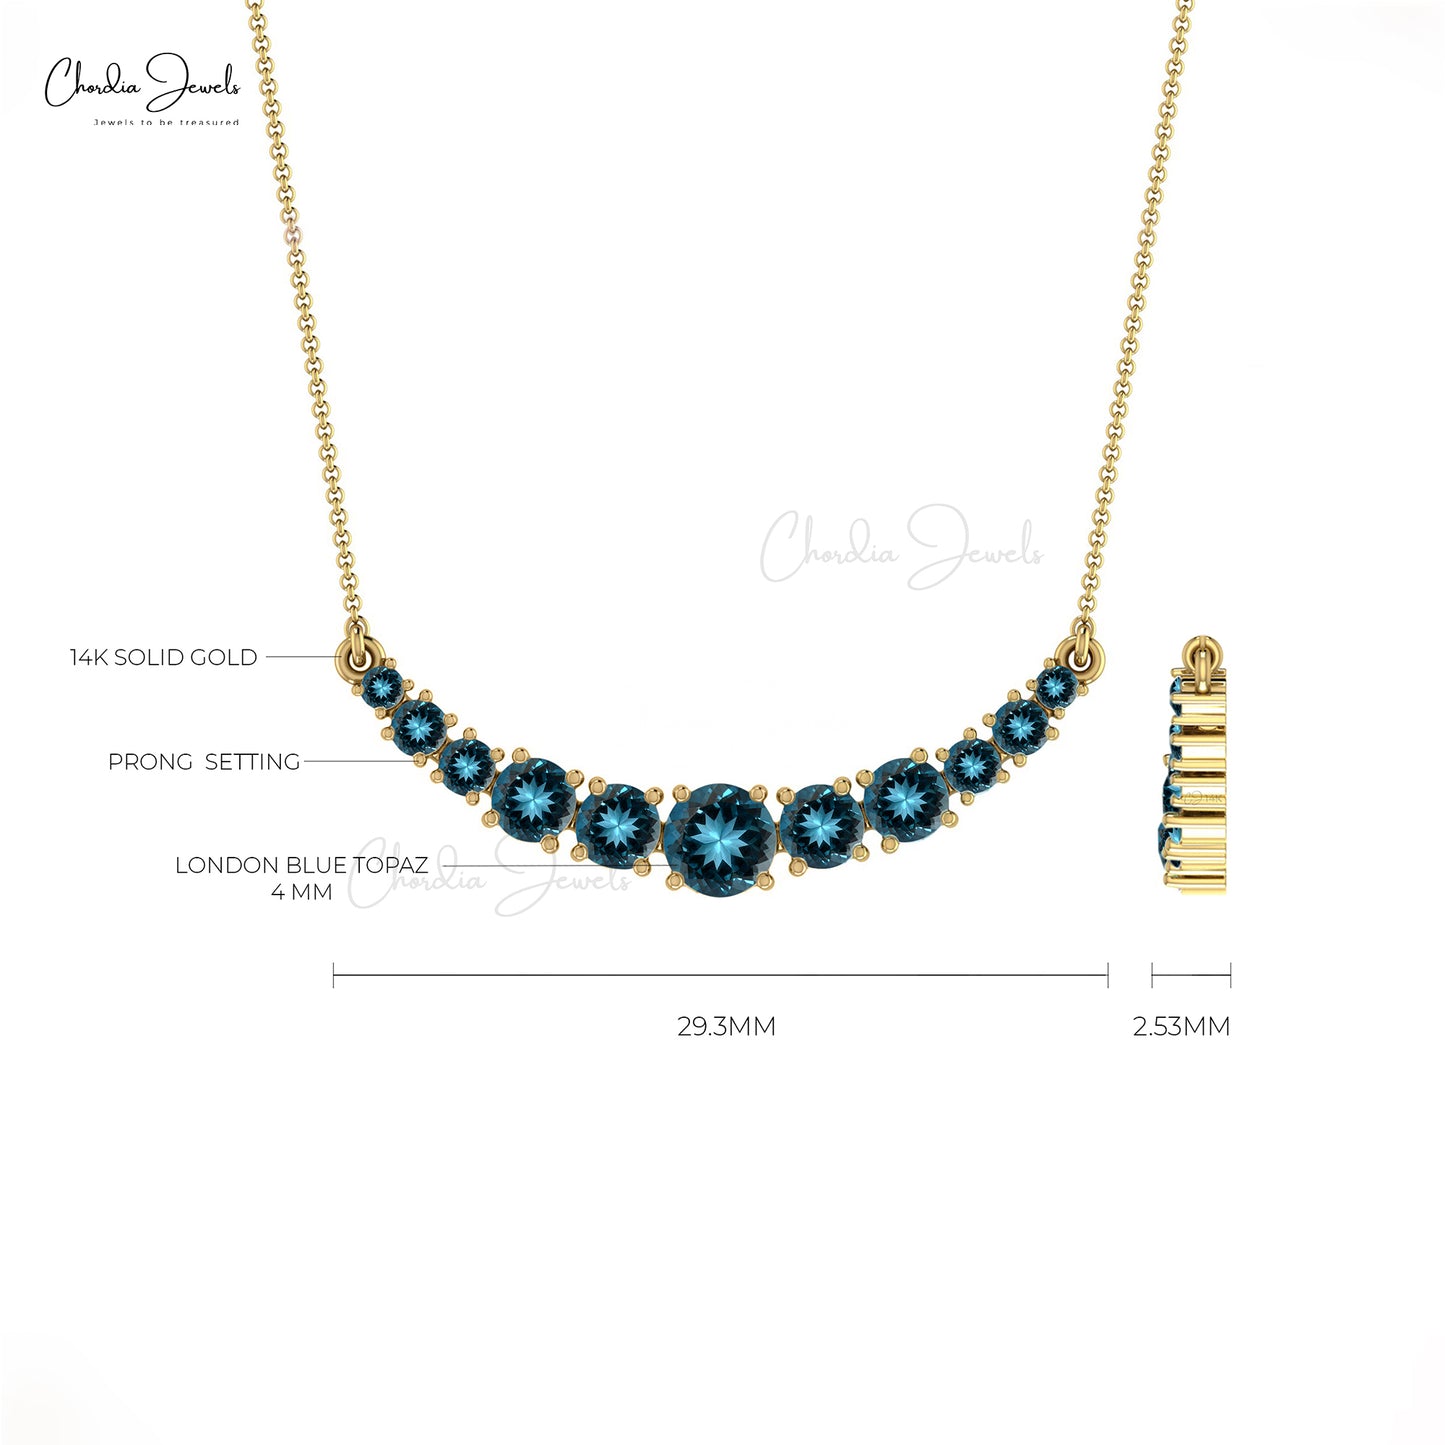 Load image into Gallery viewer, Natural London Blue Topaz Necklace, December Birthstone Necklace, 1.19 Carat Round Faceted Gemstone Necklace, Wedding Gift for Her
